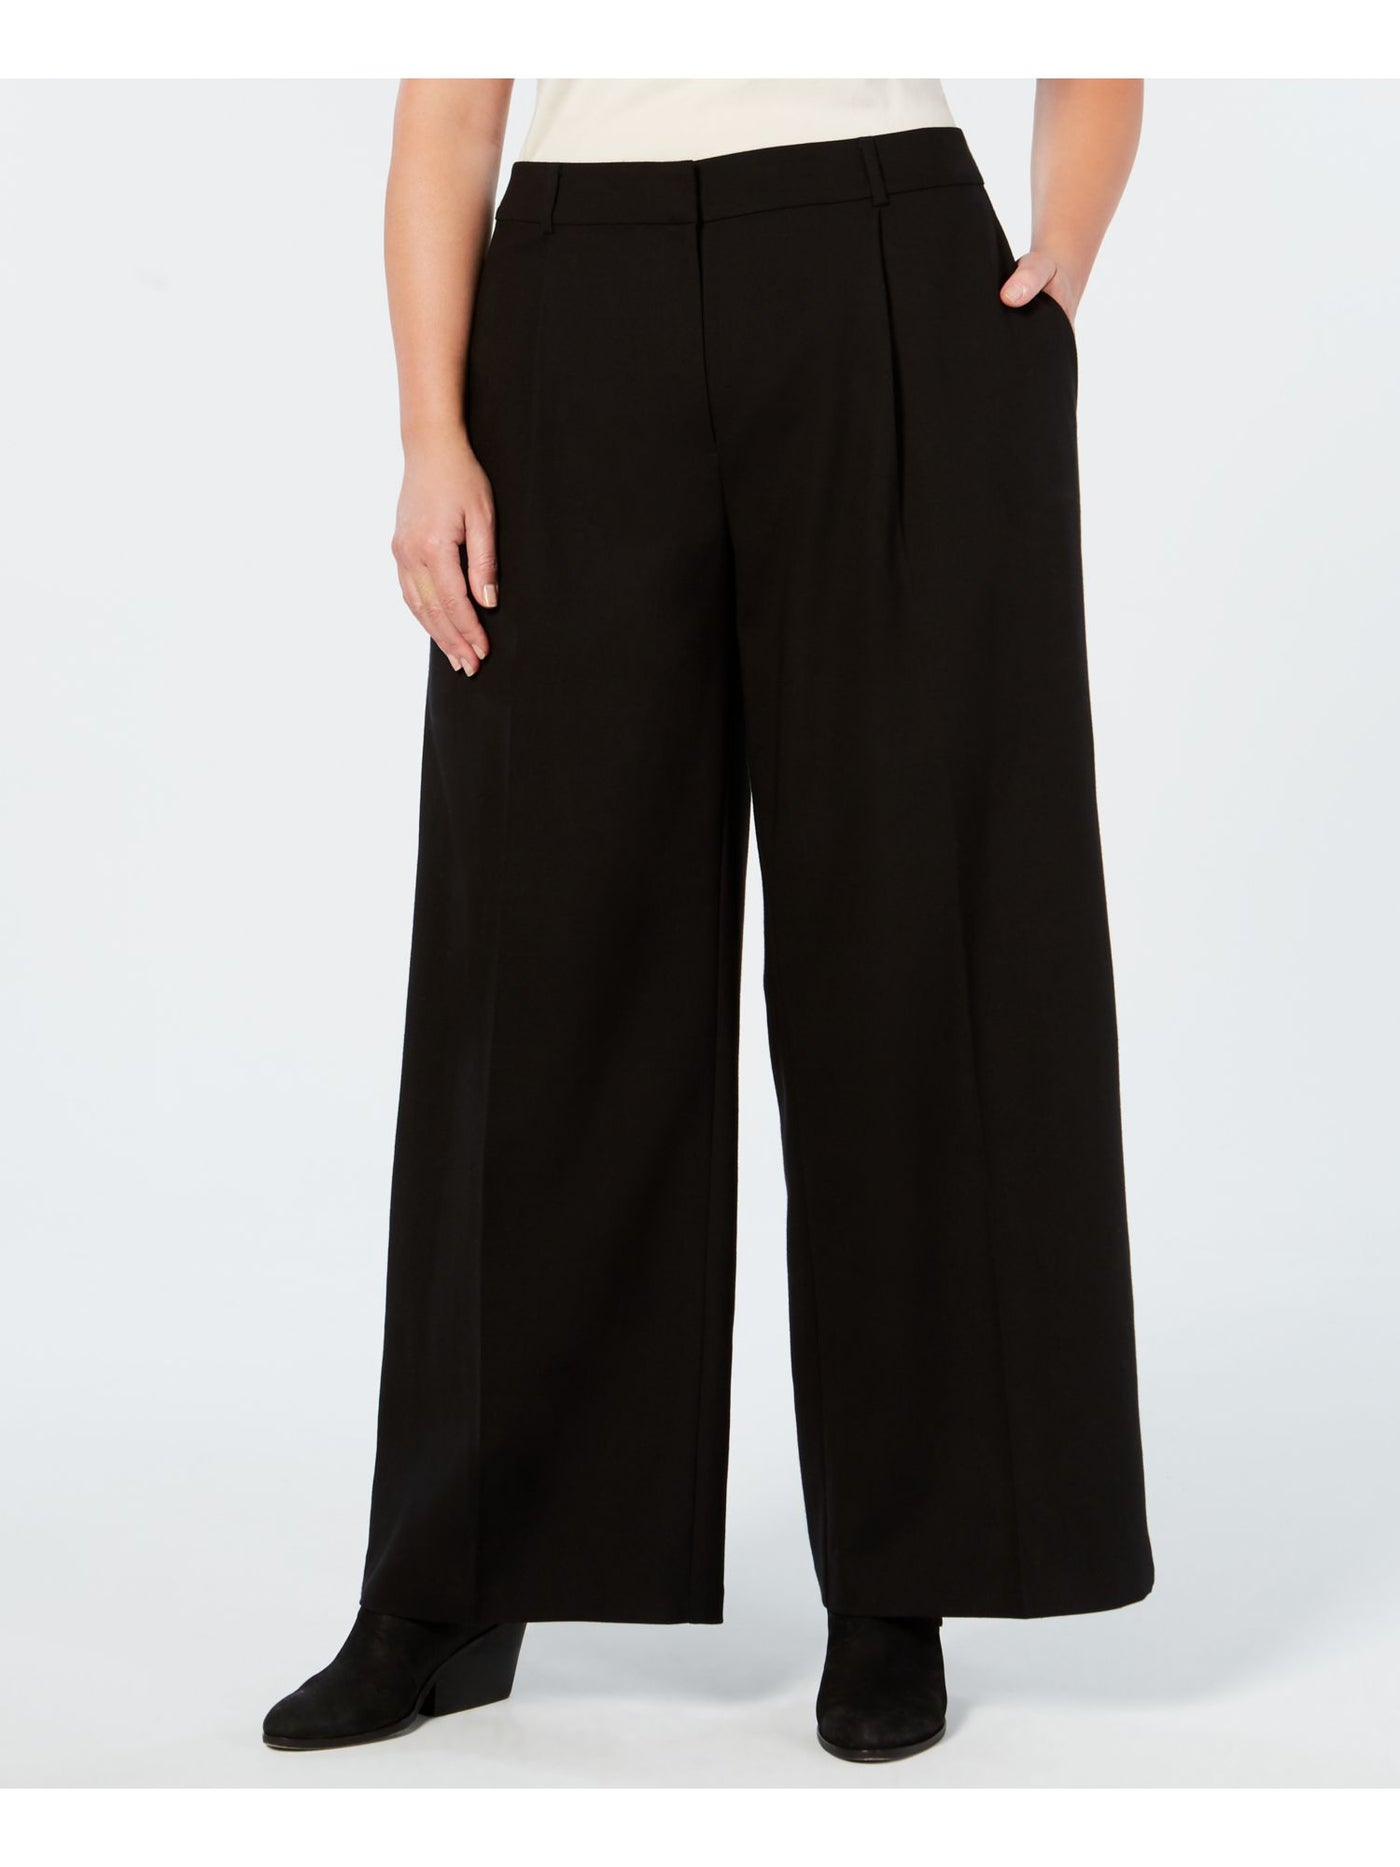 EILEEN FISHER Womens Black Stretch Zippered Pocketed Mid Rise Wide Leg Pants Plus 16W